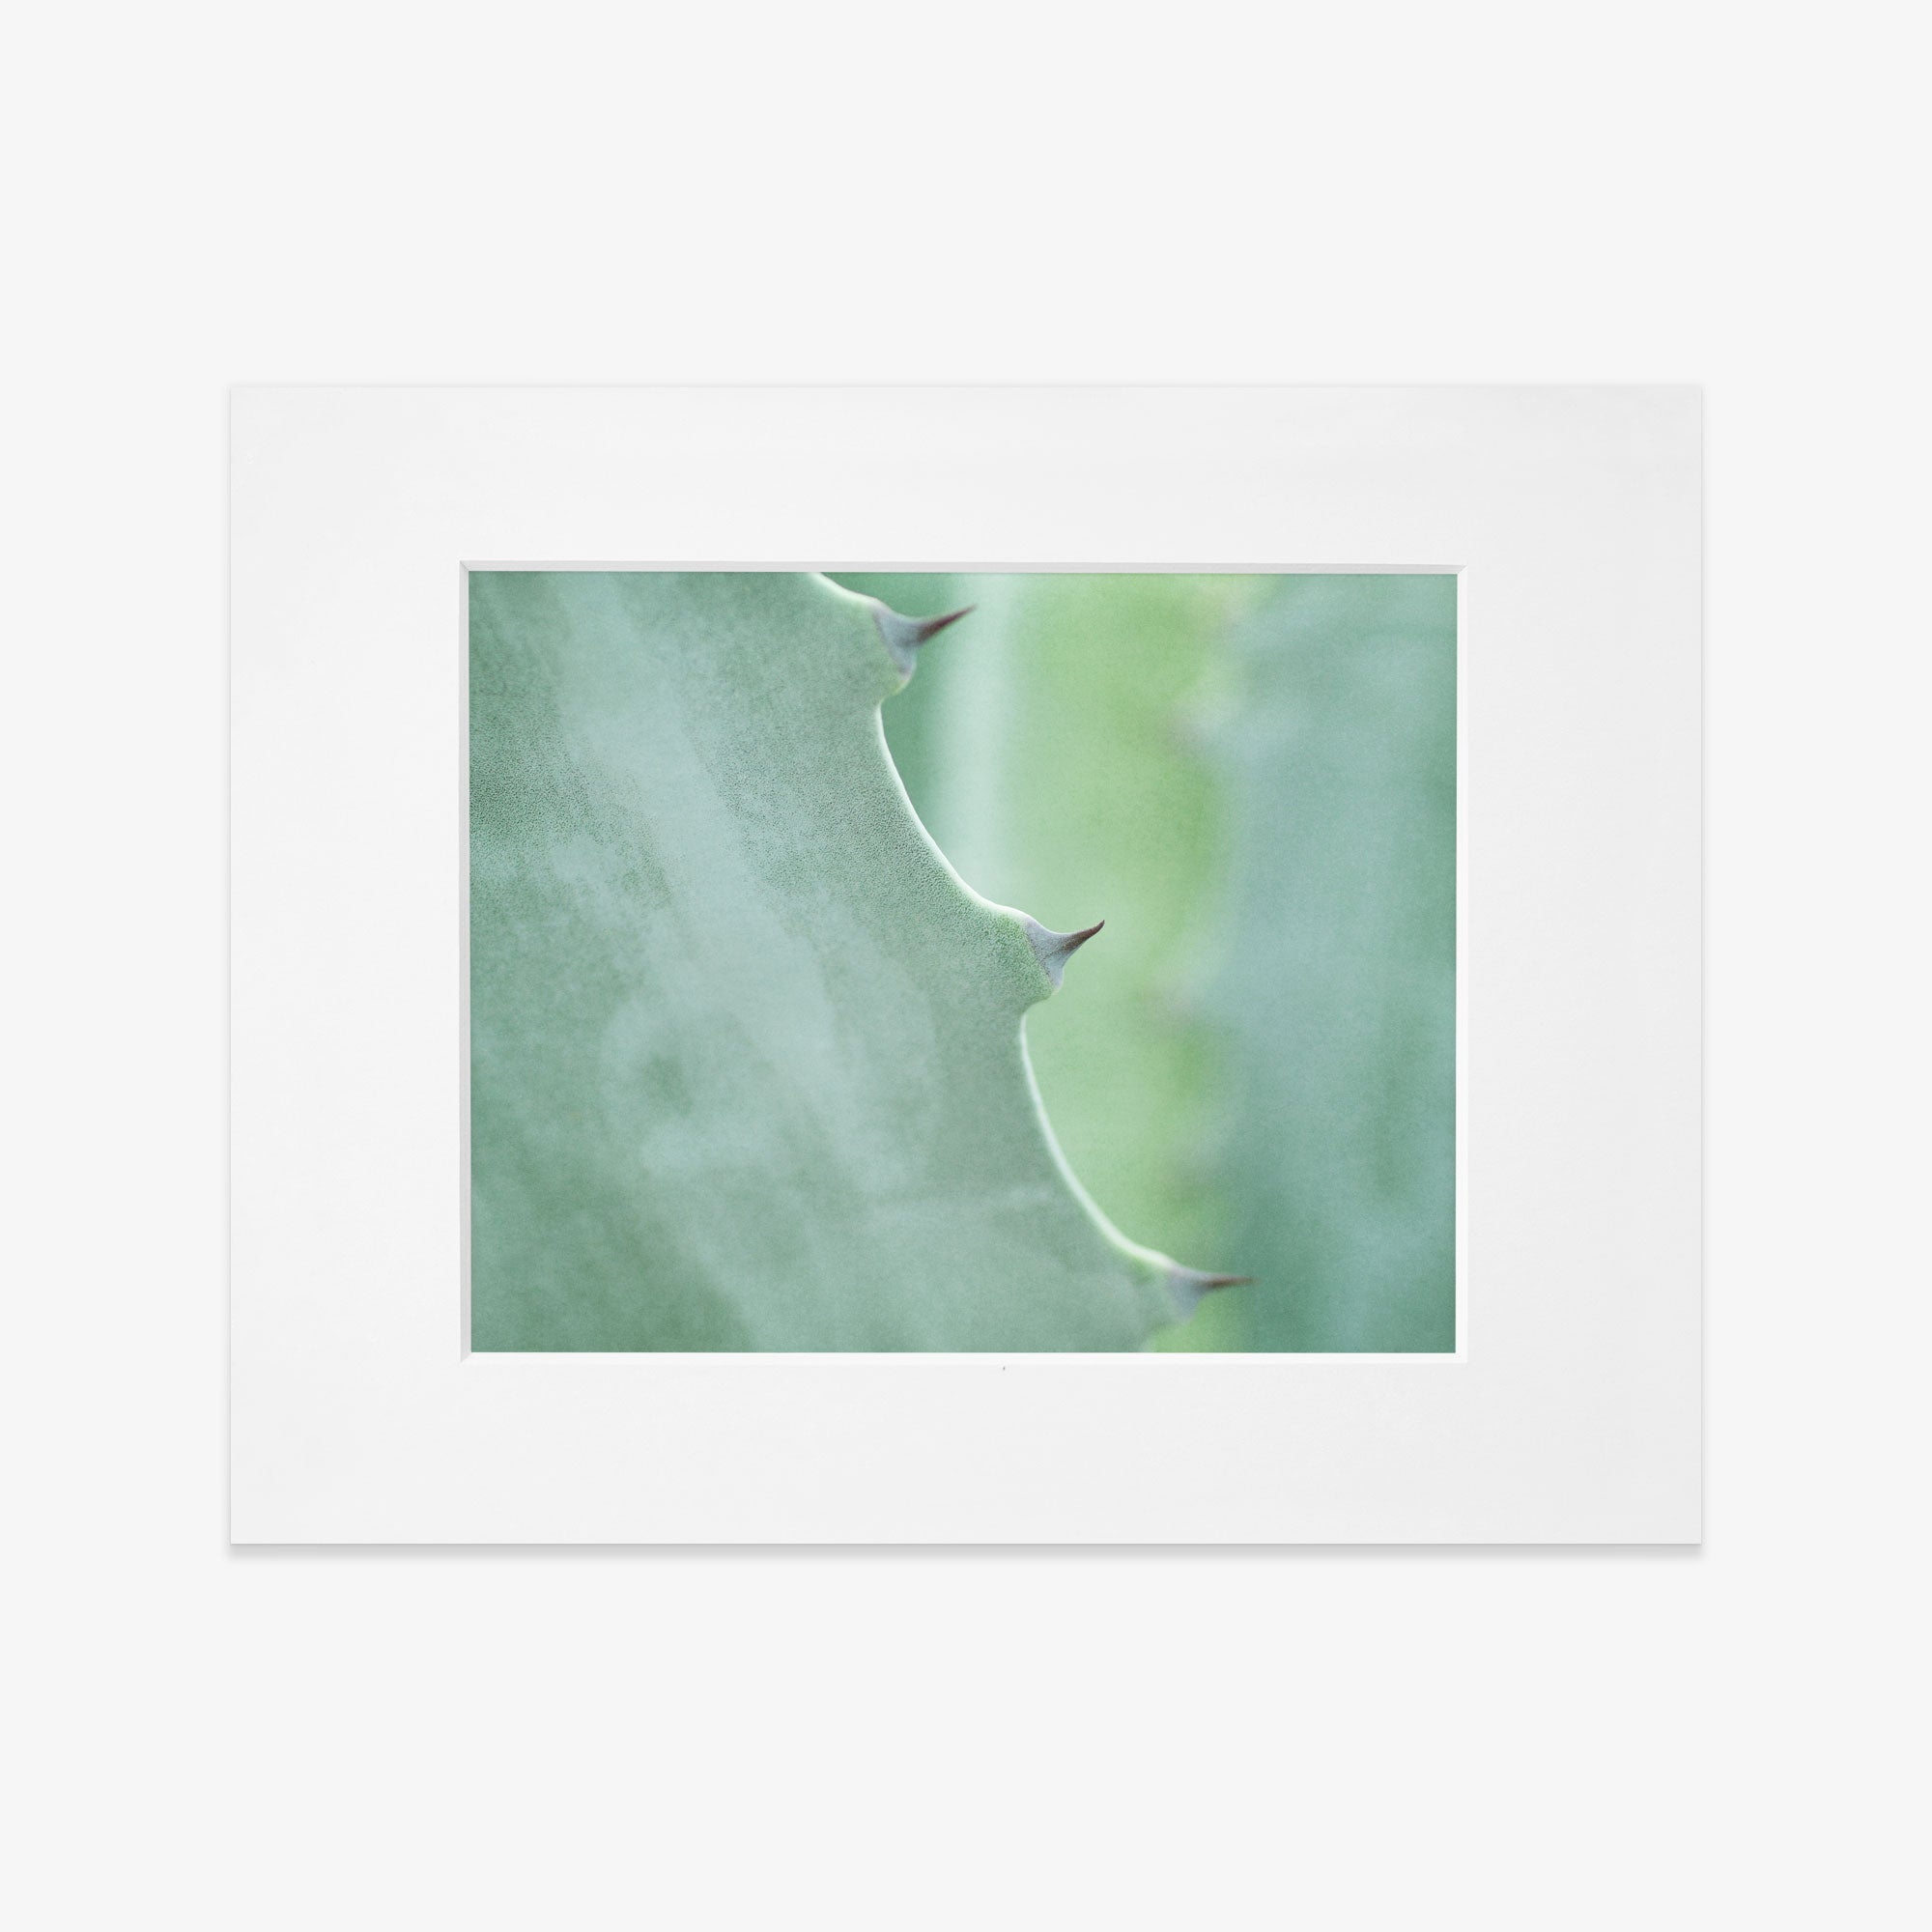 Framed photograph of a Mint Green Botanical Print, &#39;Aloe Vera Spikes&#39; by Offley Green, focusing on its spiky edges against a soft, blurred green background.